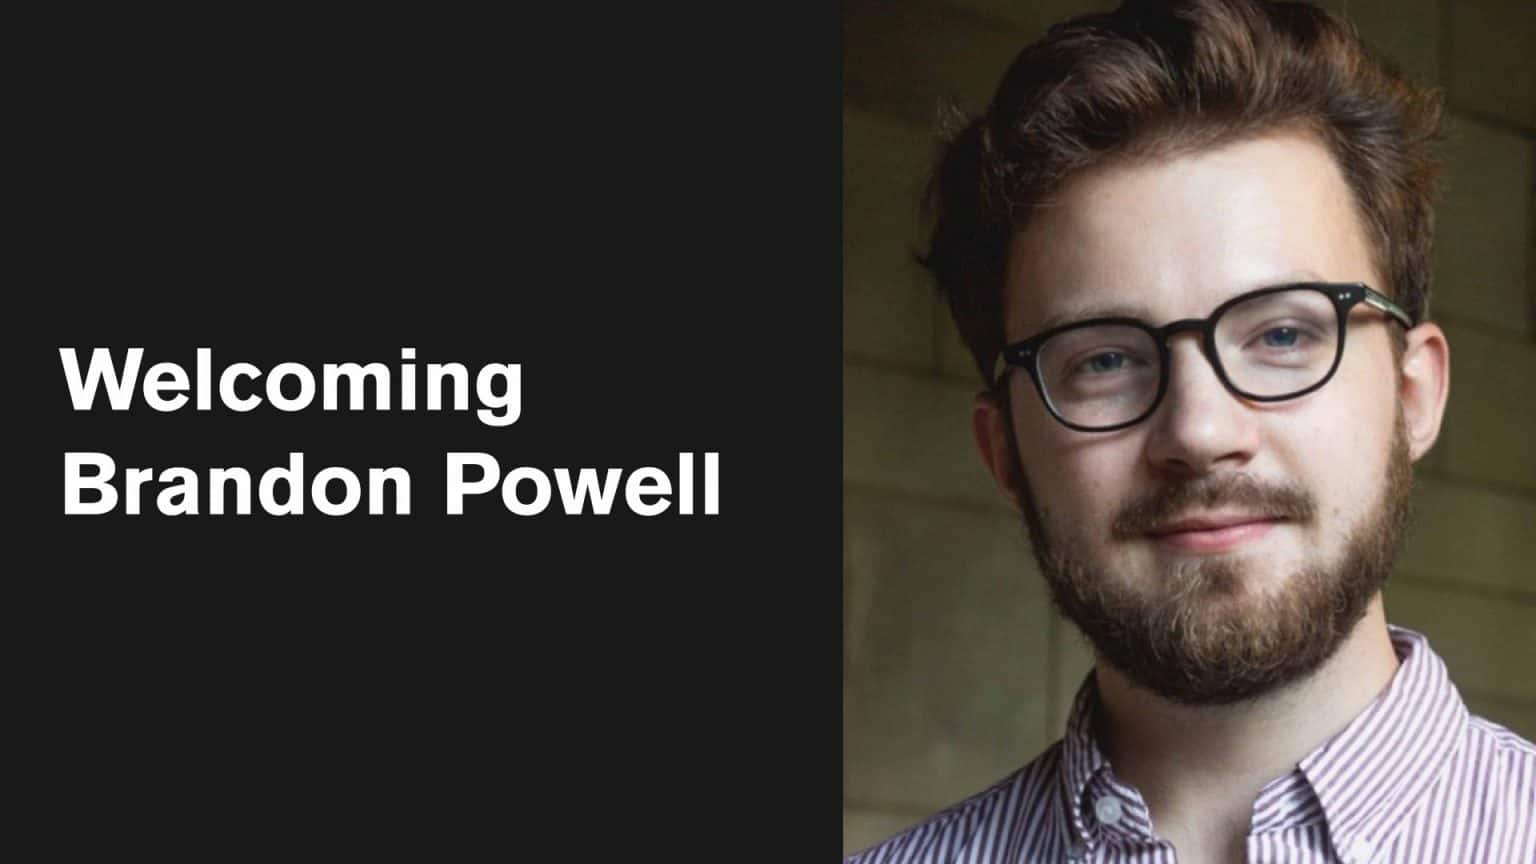 Brandon Powell joins the Bulletin - Bulletin of the Atomic Scientists